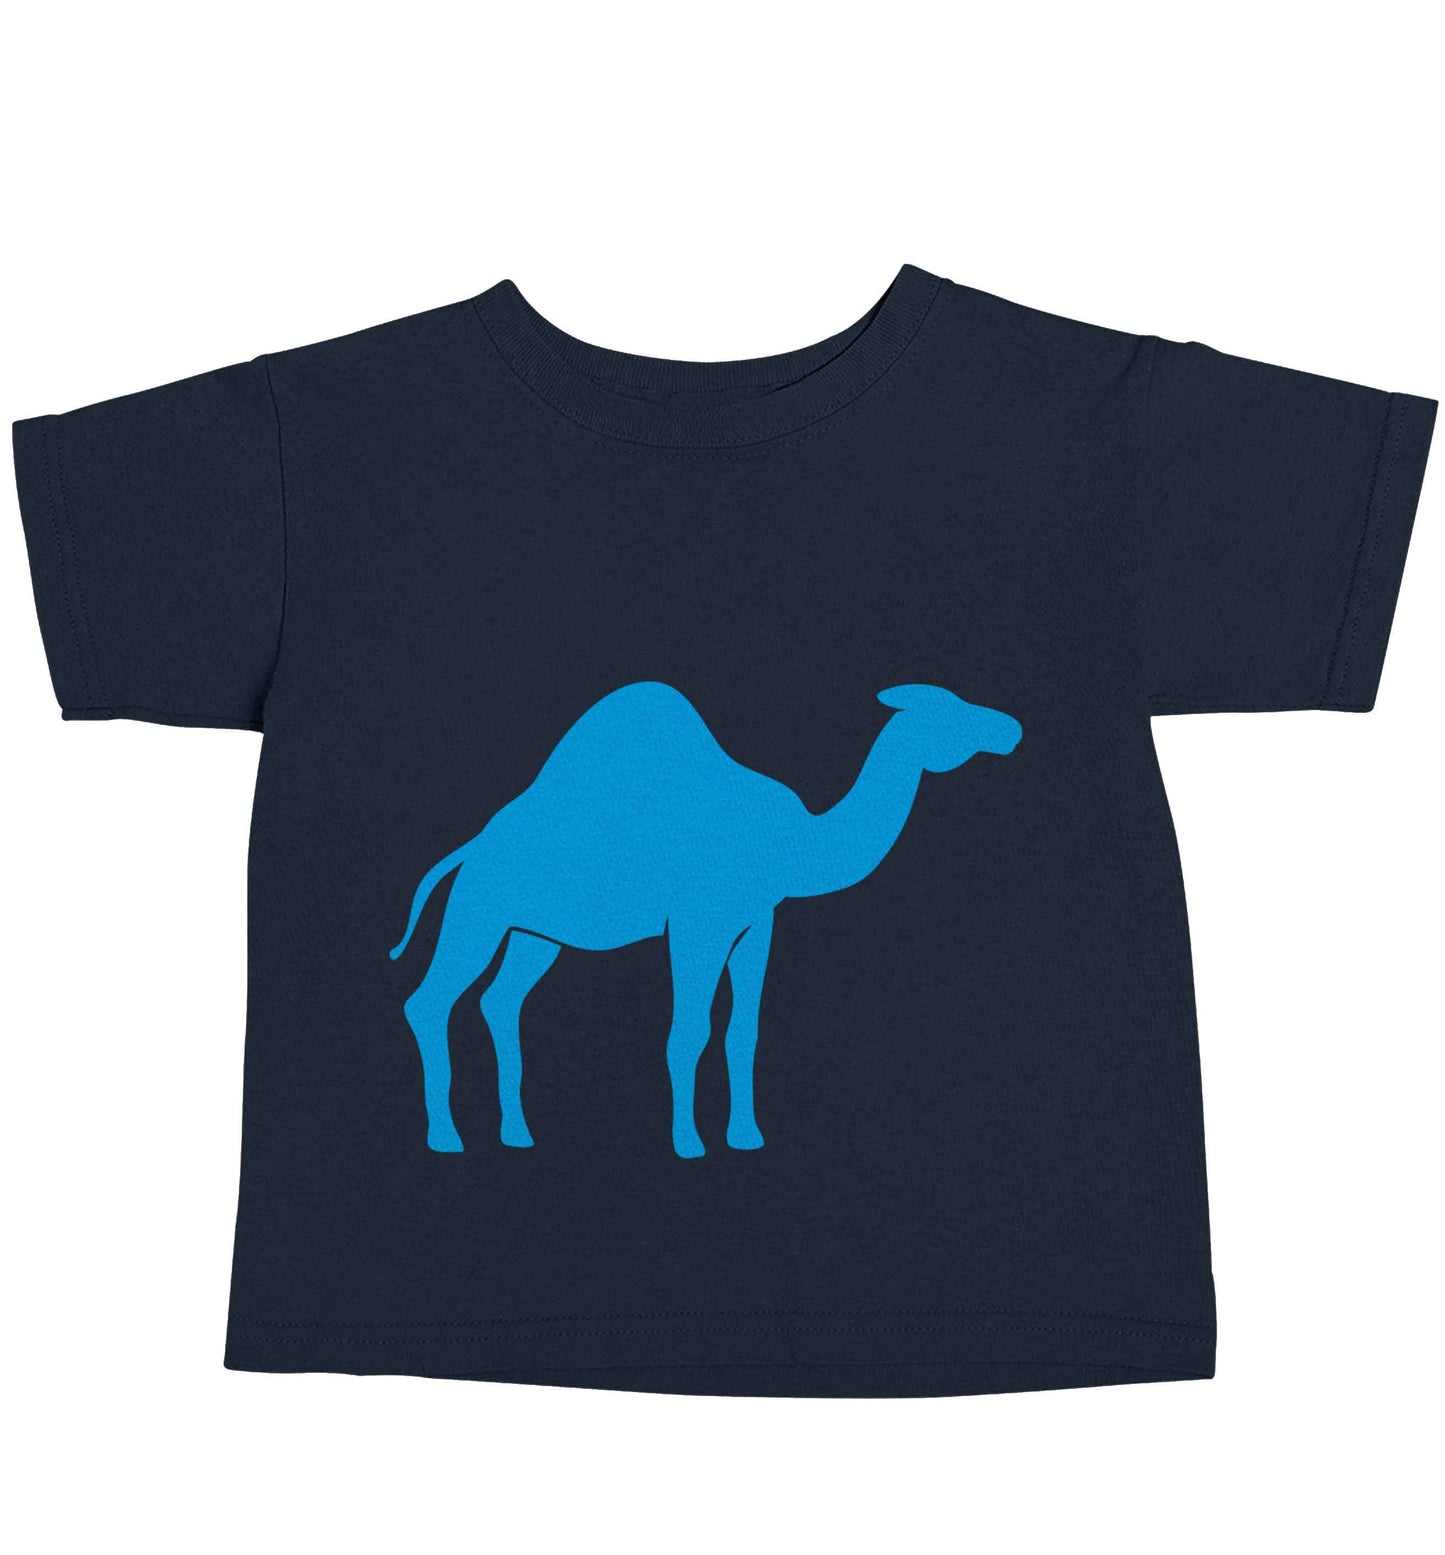 Blue camel navy baby toddler Tshirt 2 Years